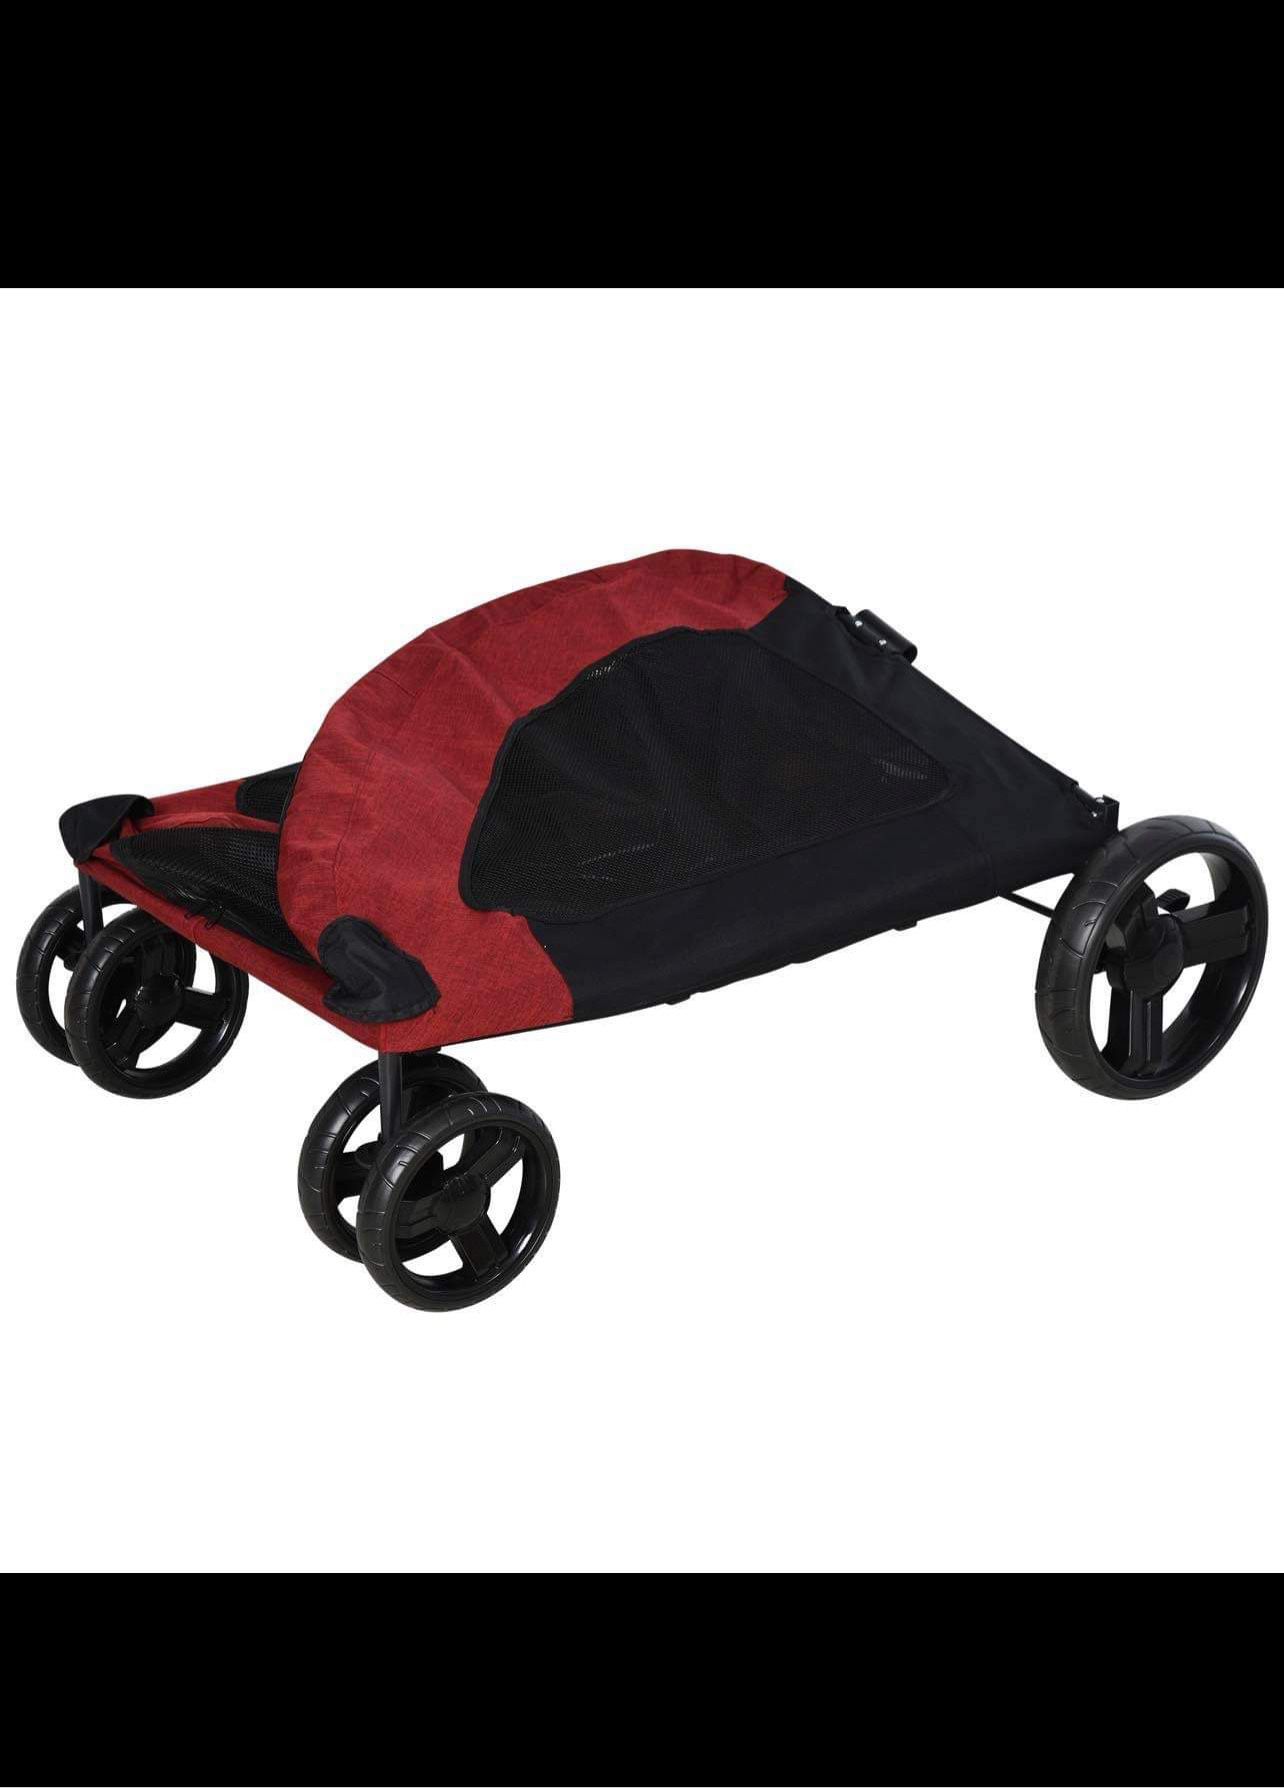 Foldable Dog Stroller with Storage Pocket, Oxford Fabric for Medium Size Dogs - Red